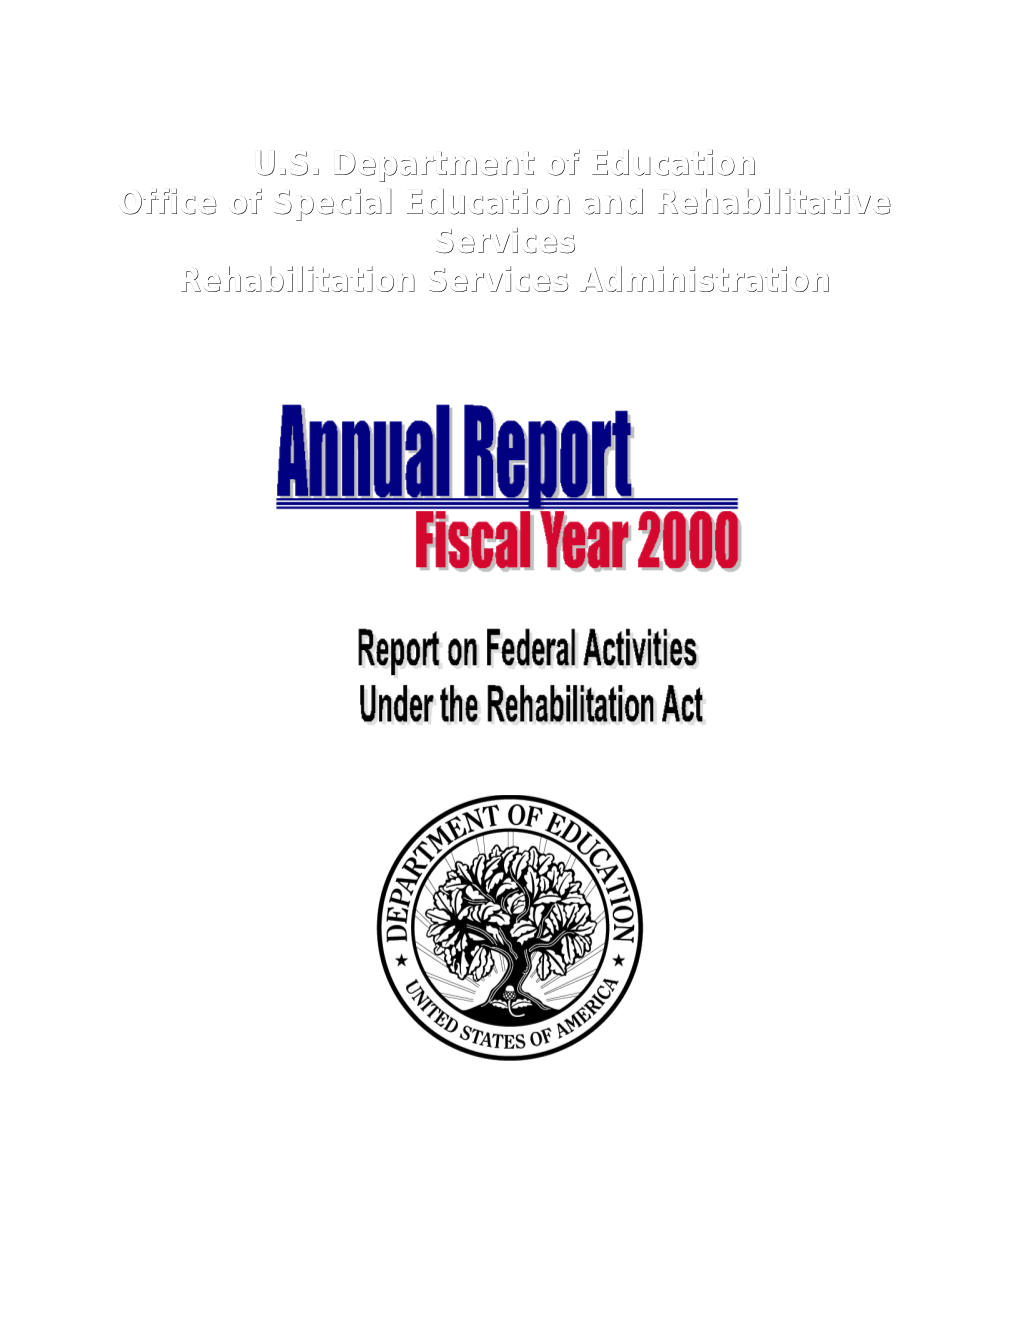 Rehabilitation Services Administration (RSA) Annual Report, Fiscal Year 2000: Complete